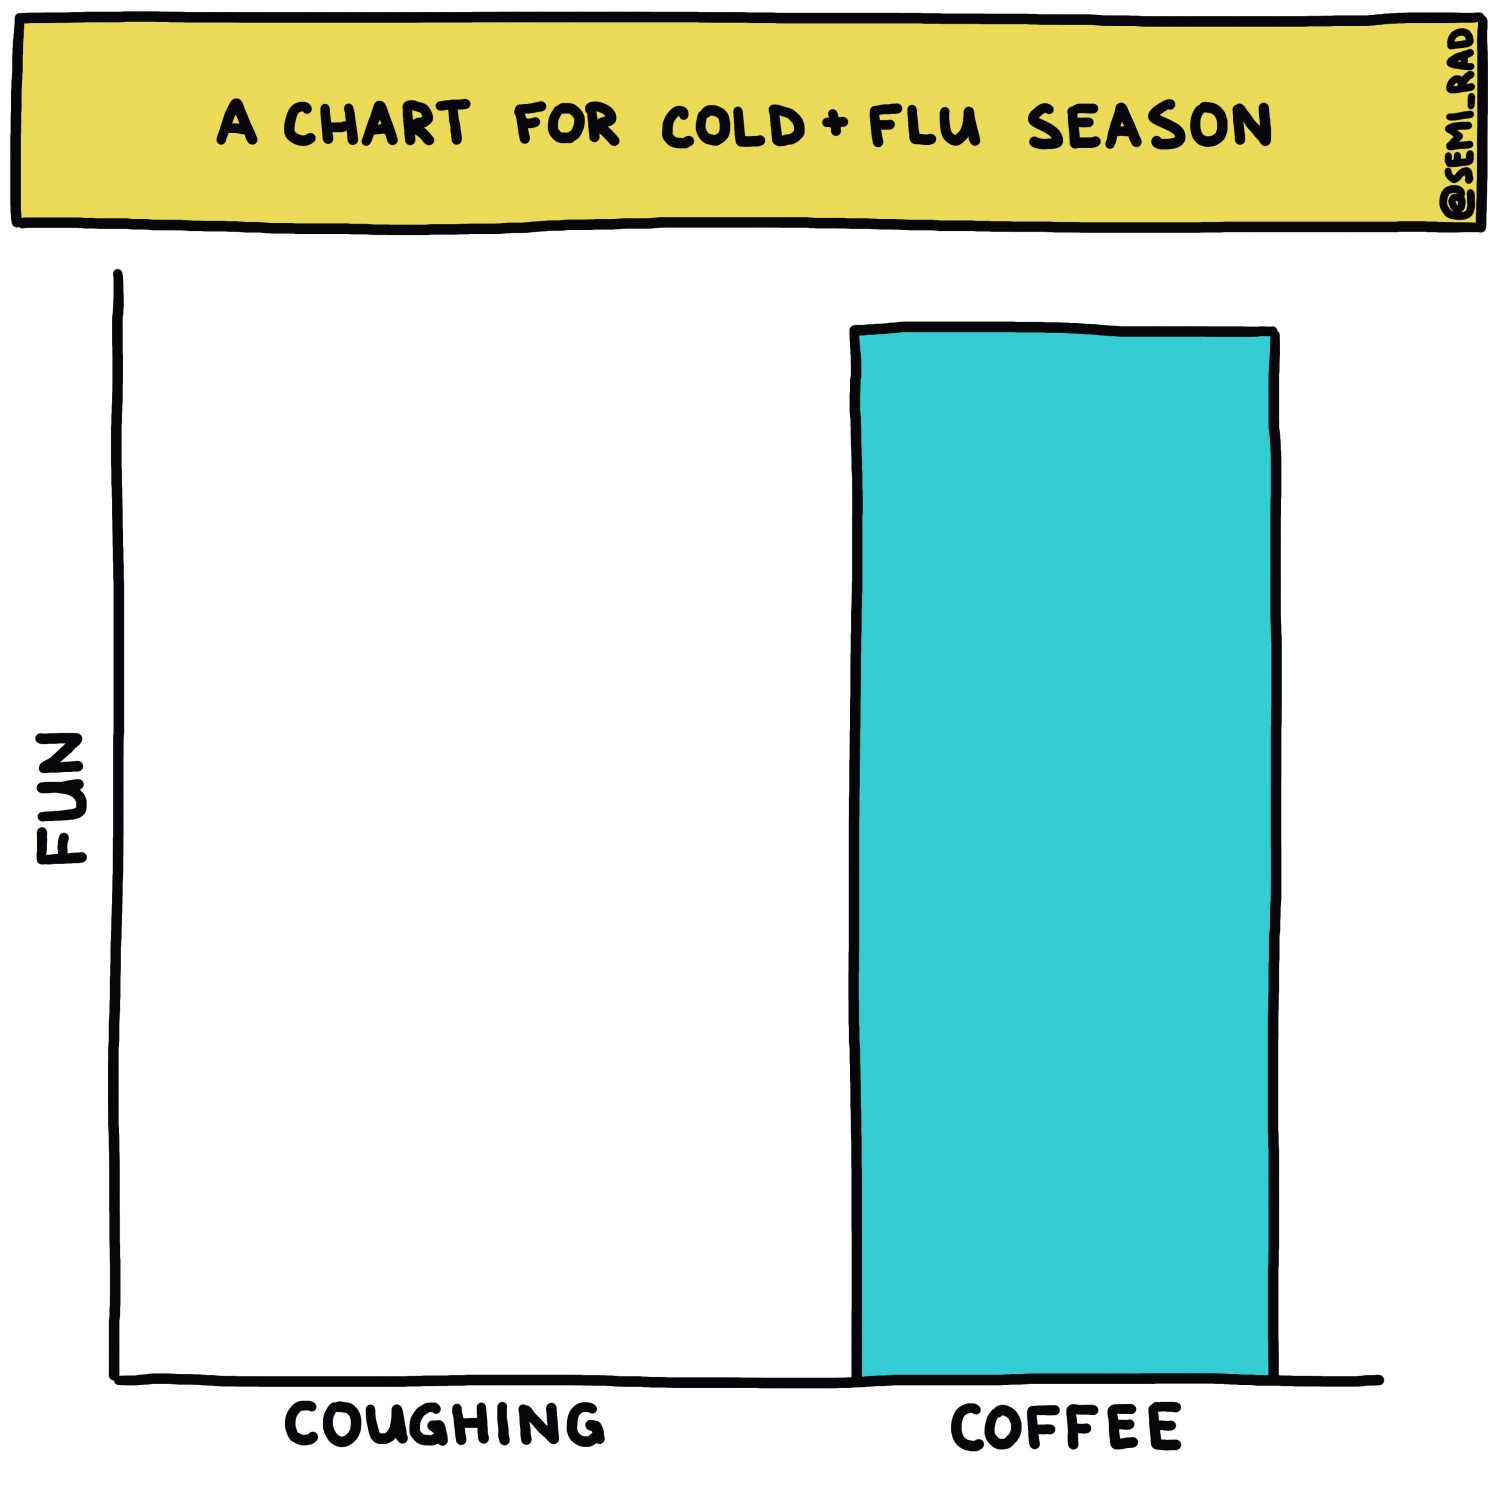 semi-rad chart: a chart for cold and flu season (coughing vs coffee)